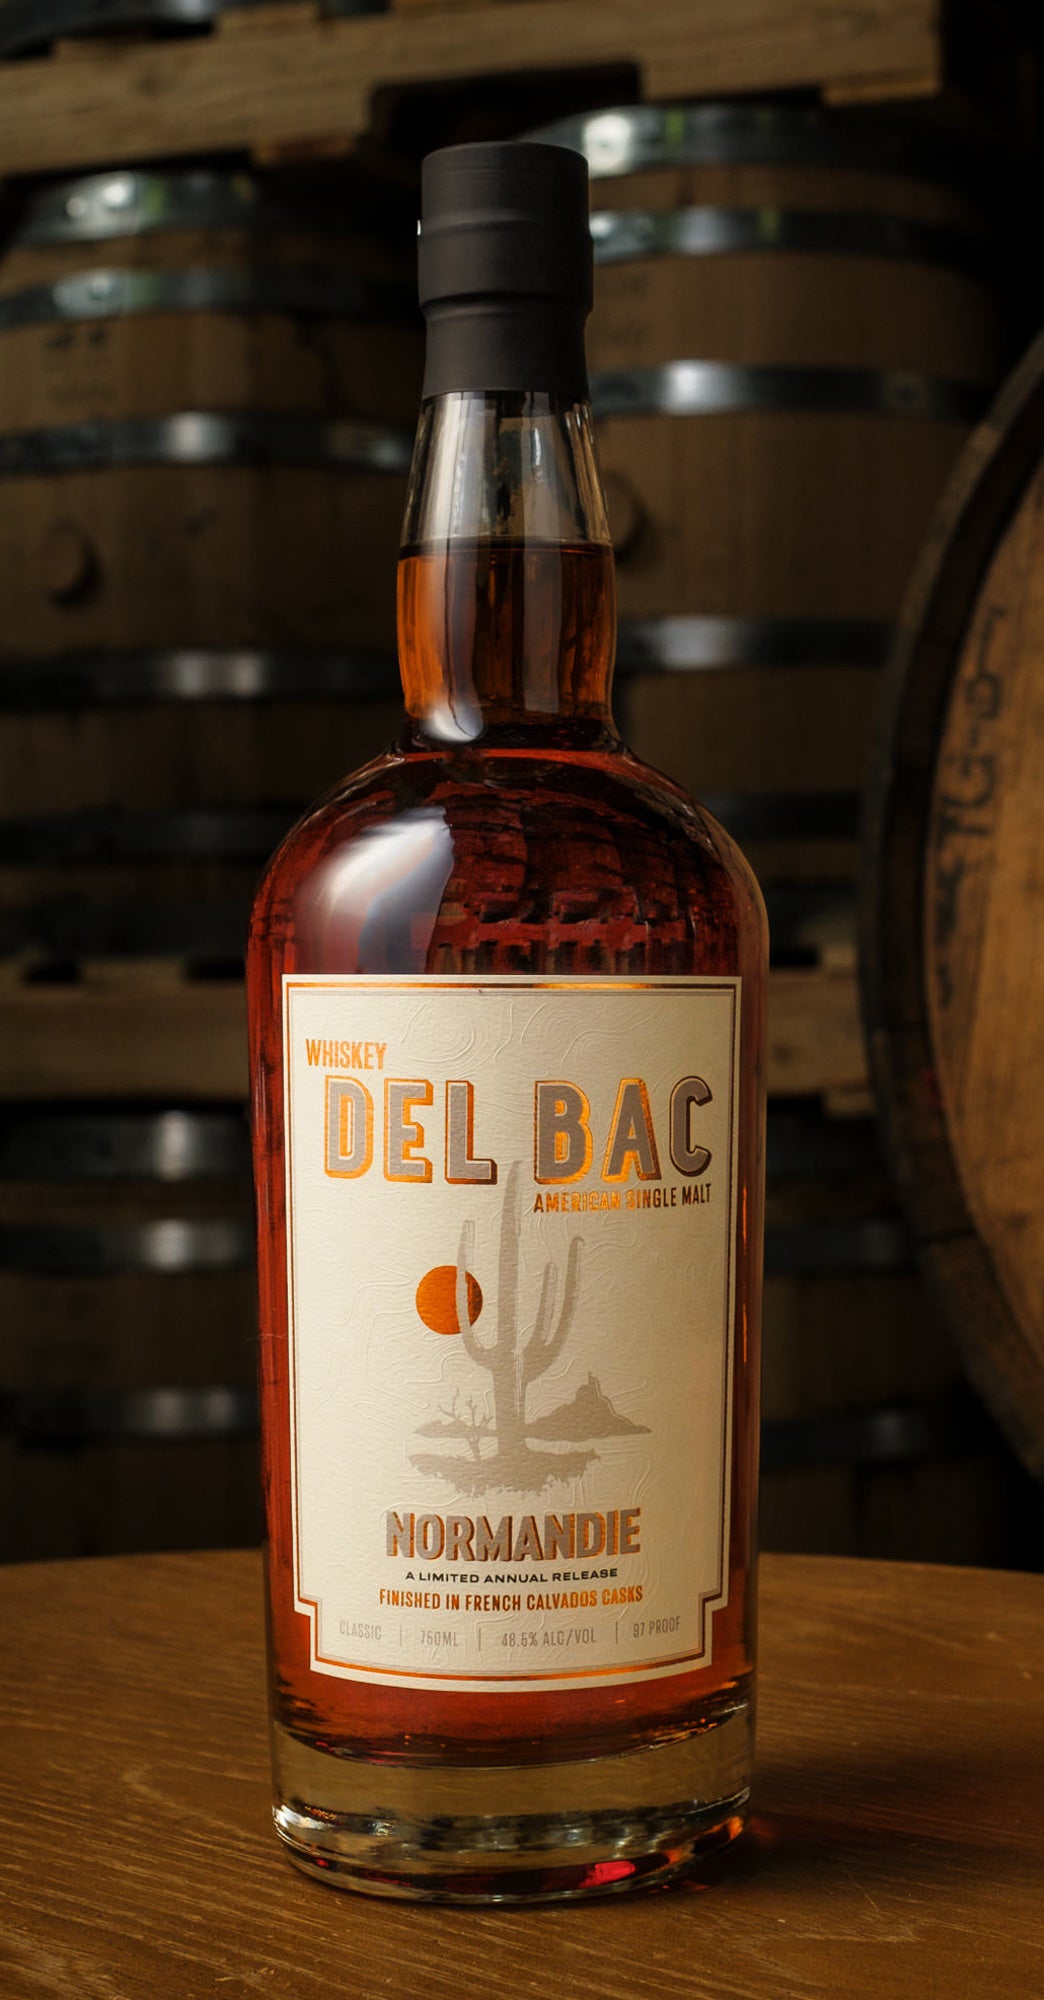 Del Bac Normandie Limited Release Whiskey